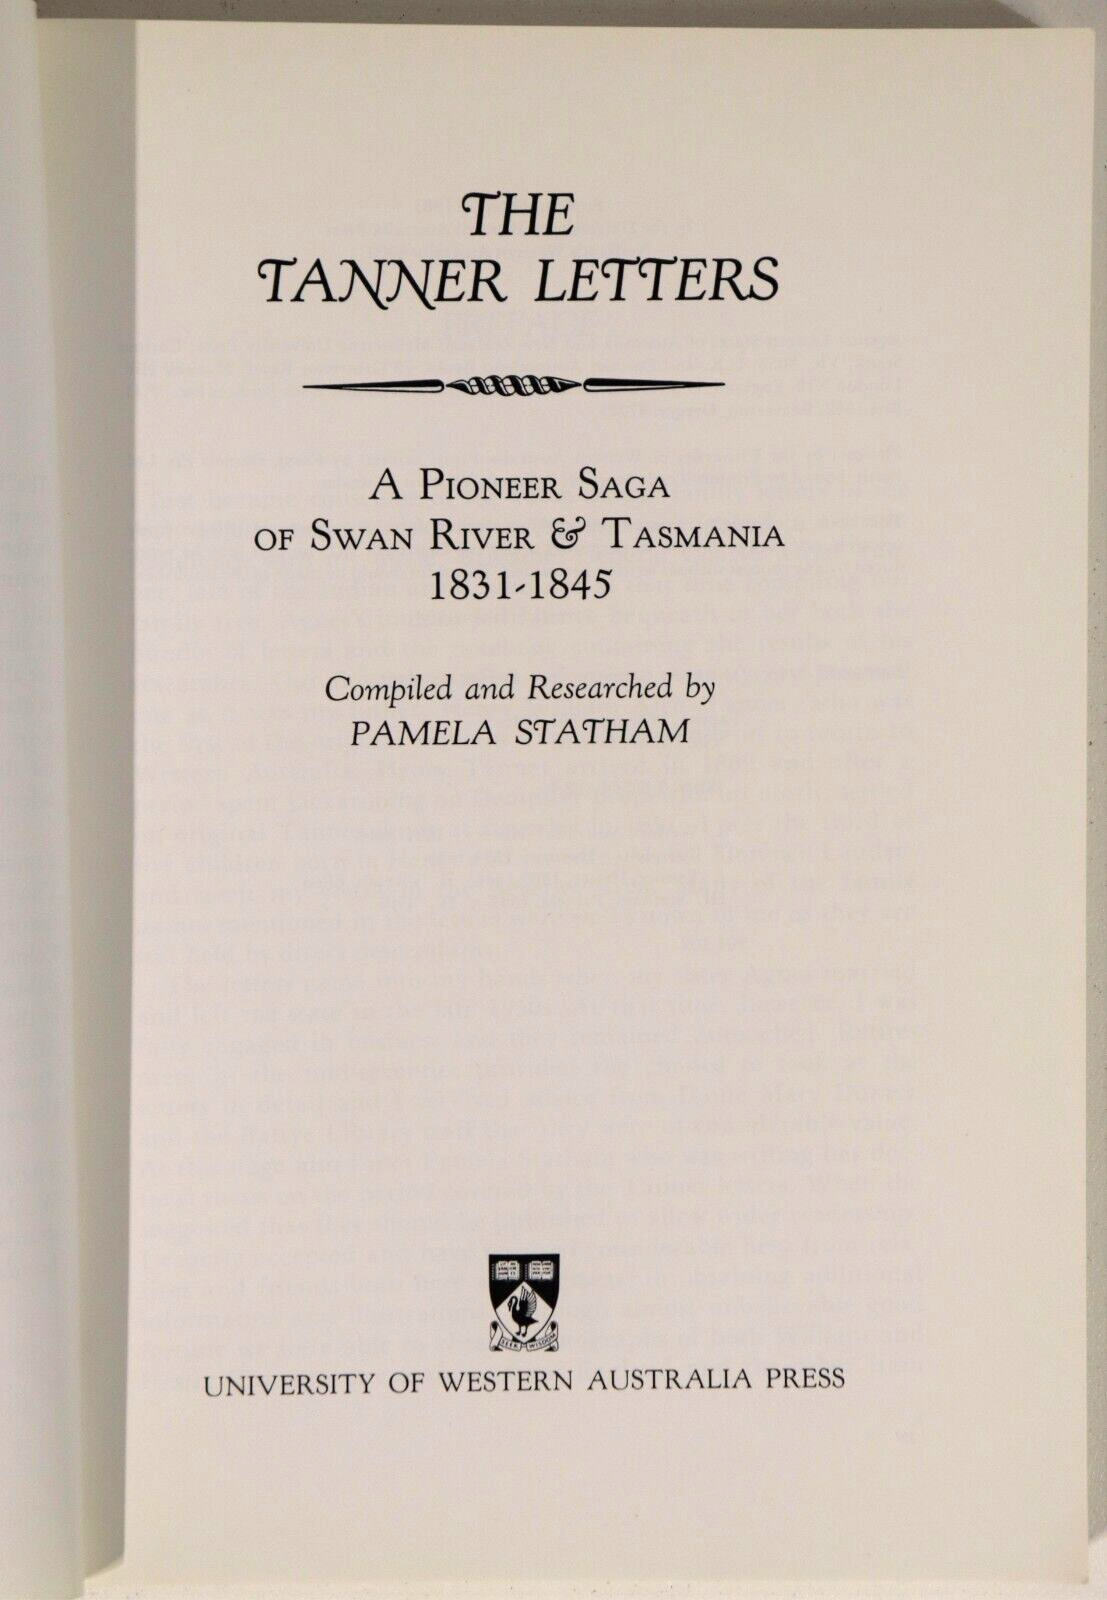 The Tanner Letters by Pamela Statham - 1981 - Australian Colonial History Book - 0